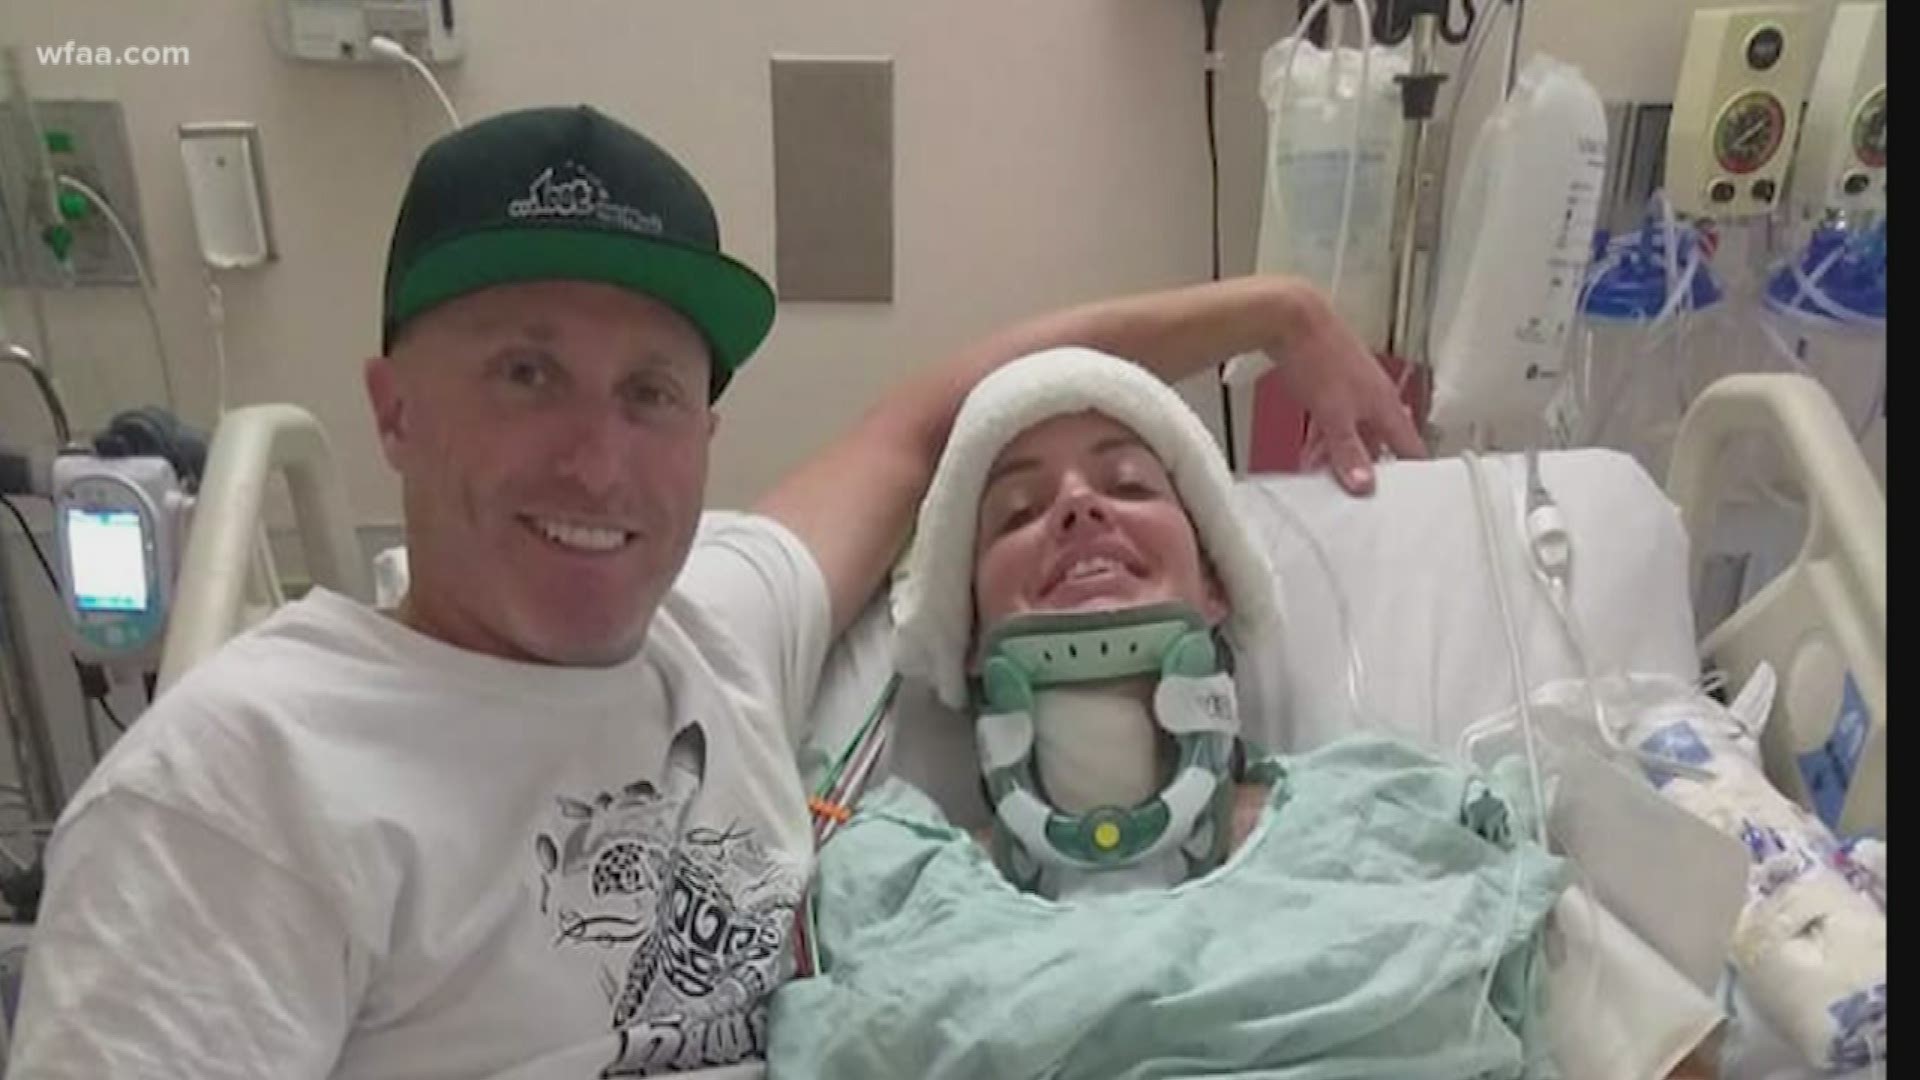 Paralyzed bride fights to get back home to Texas